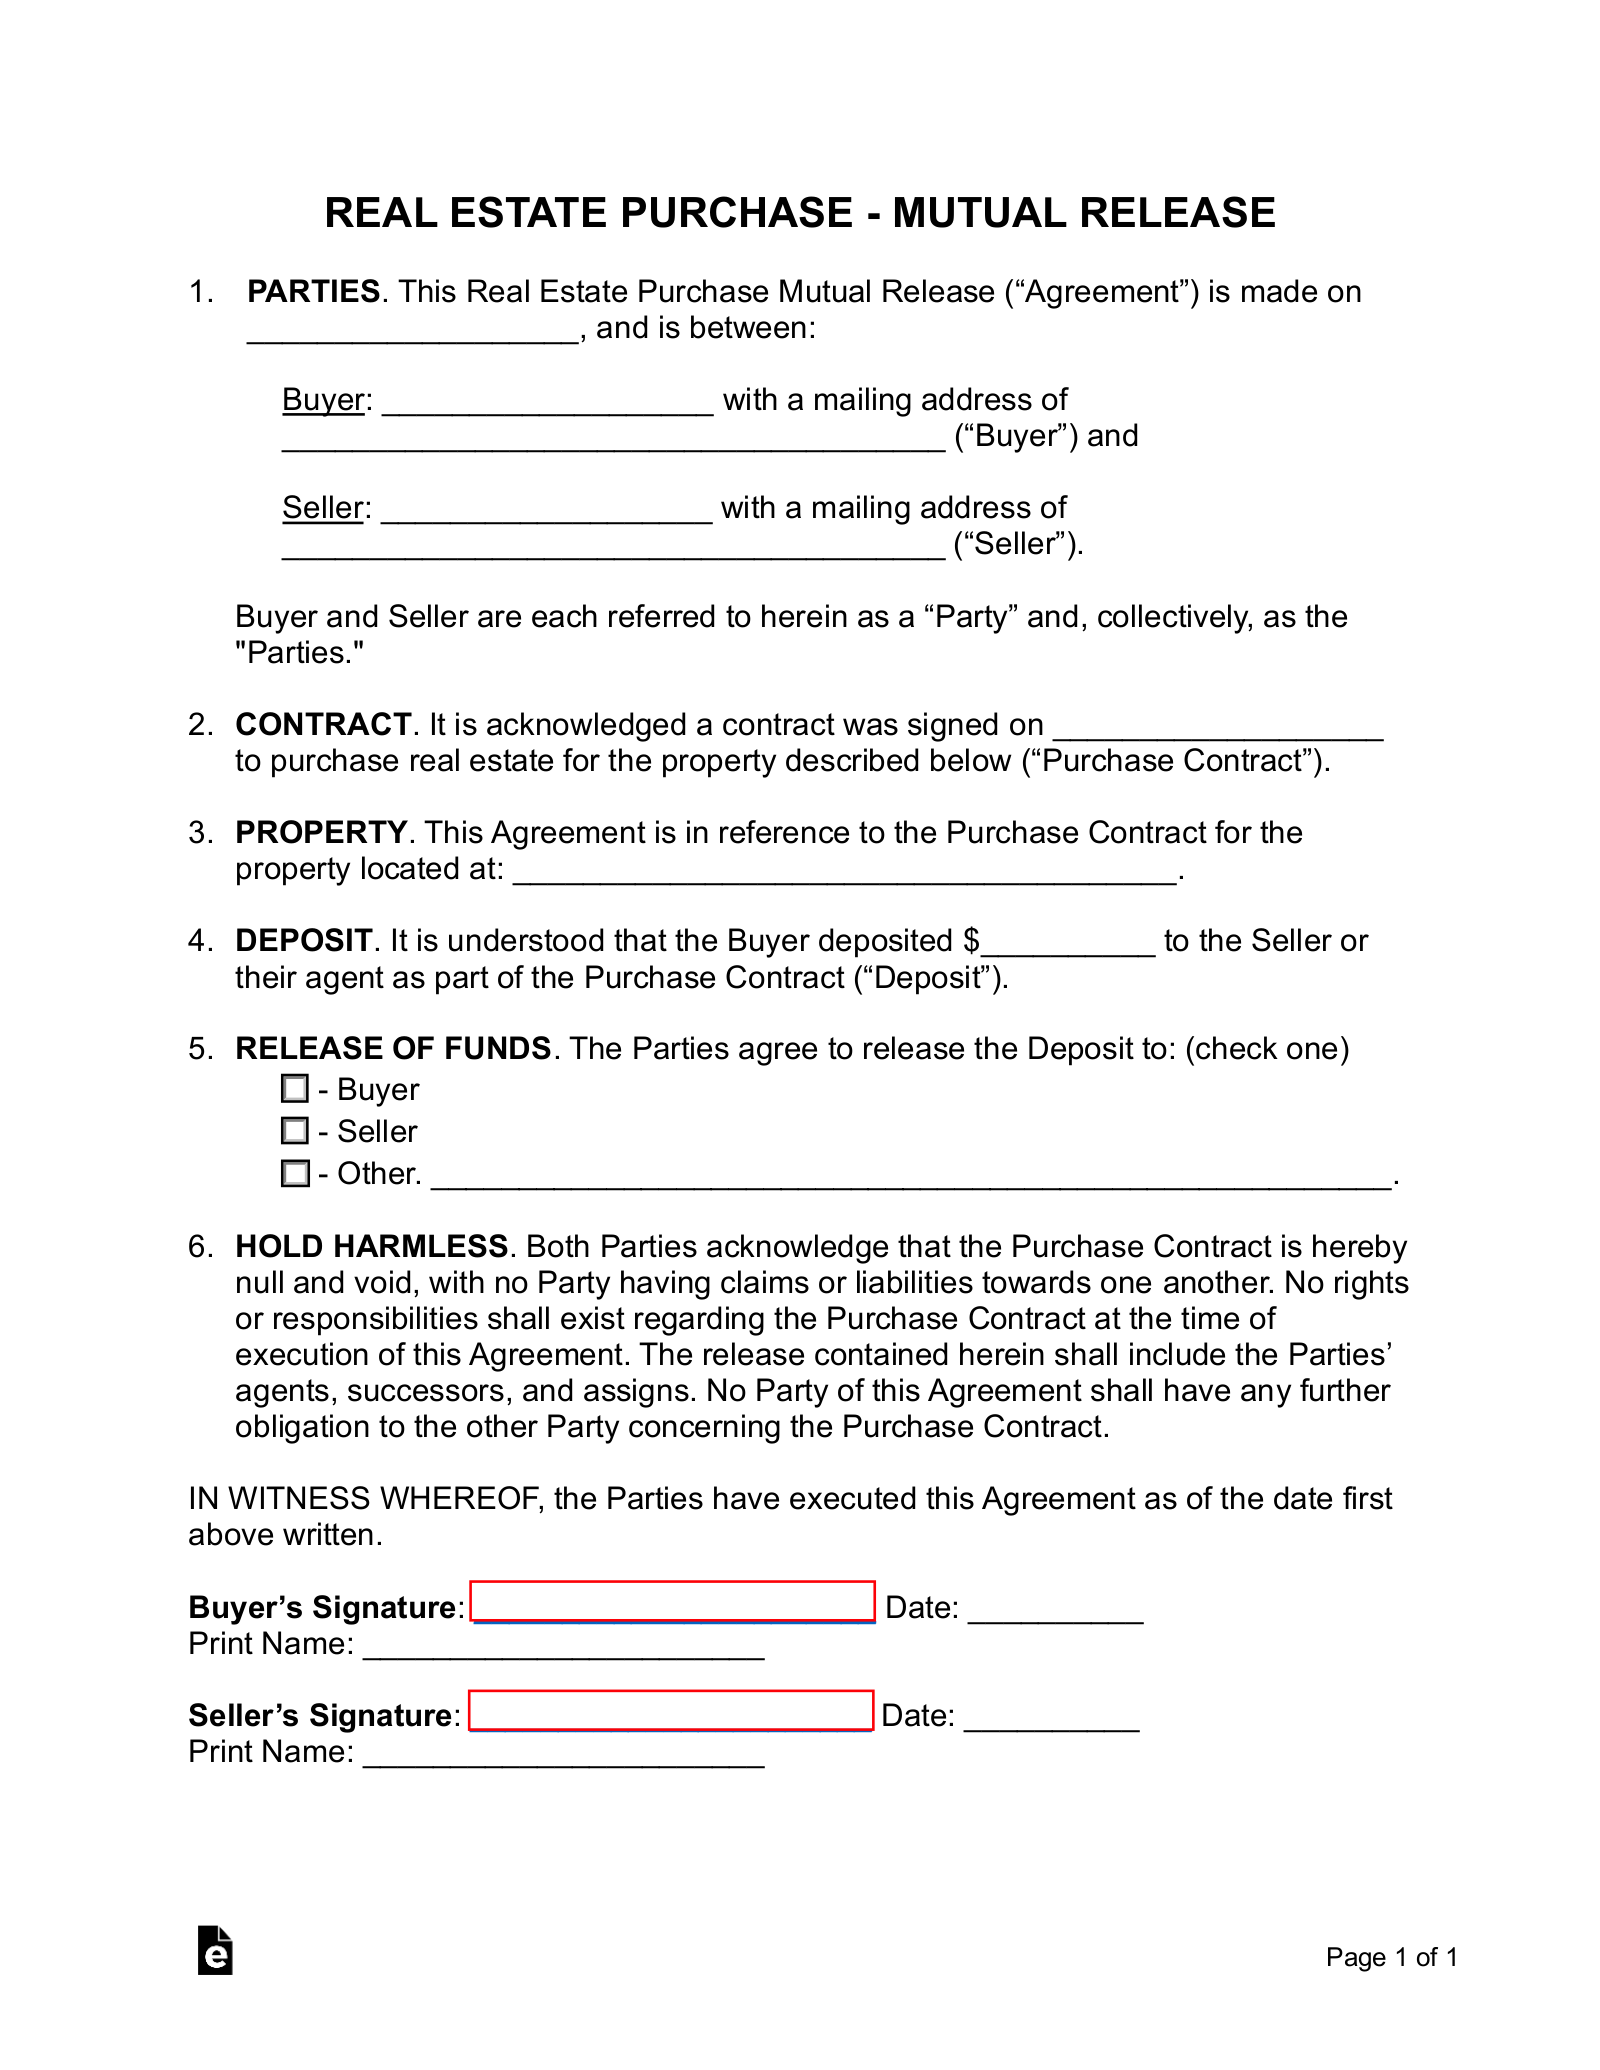 Real Estate Mutual Release Agreements (2)